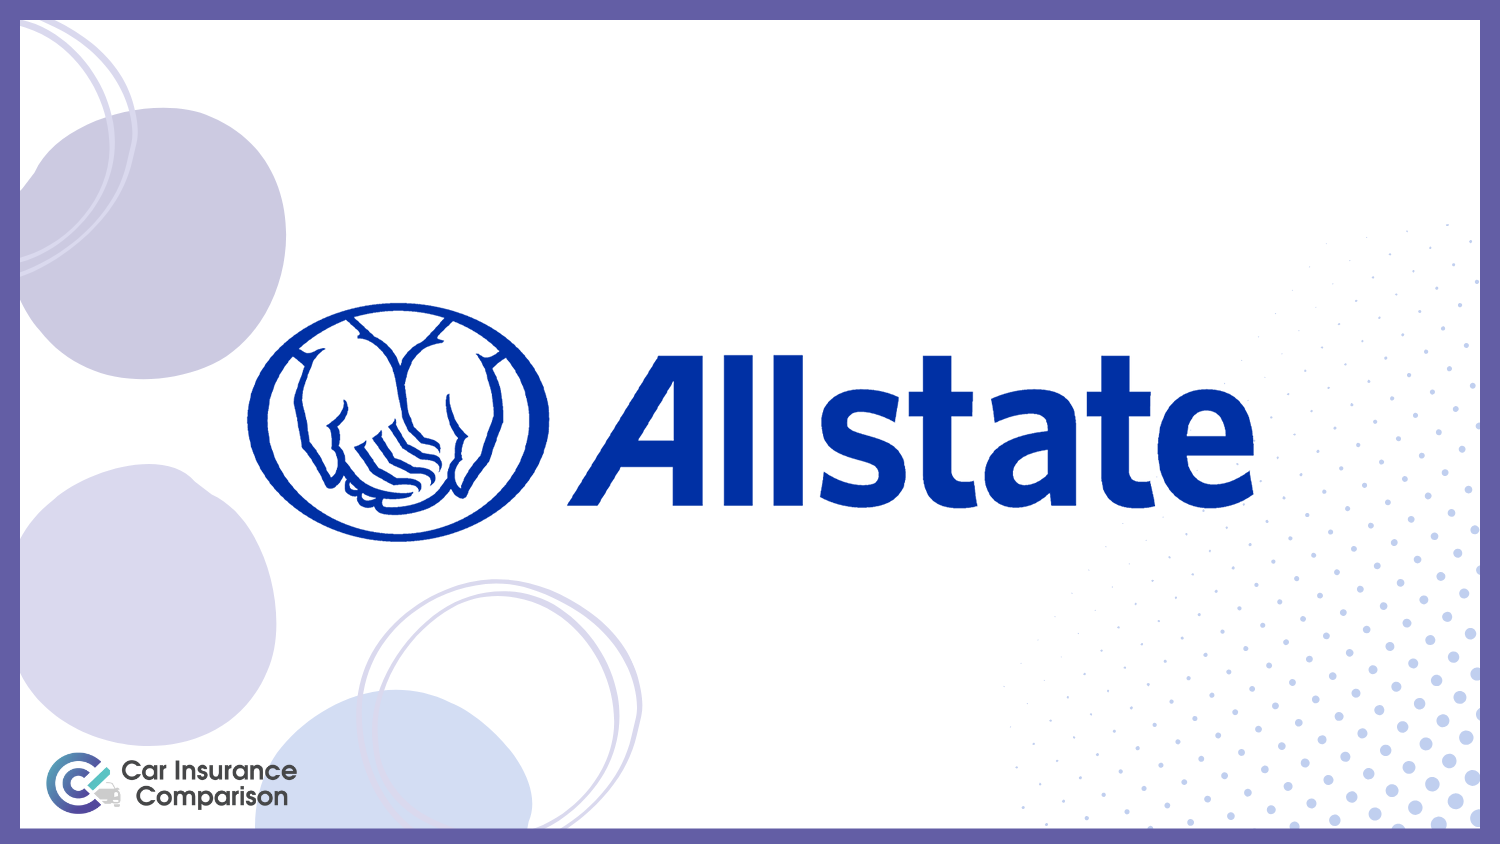 Allstate: Best Car Insurance for a Bad Driving Record